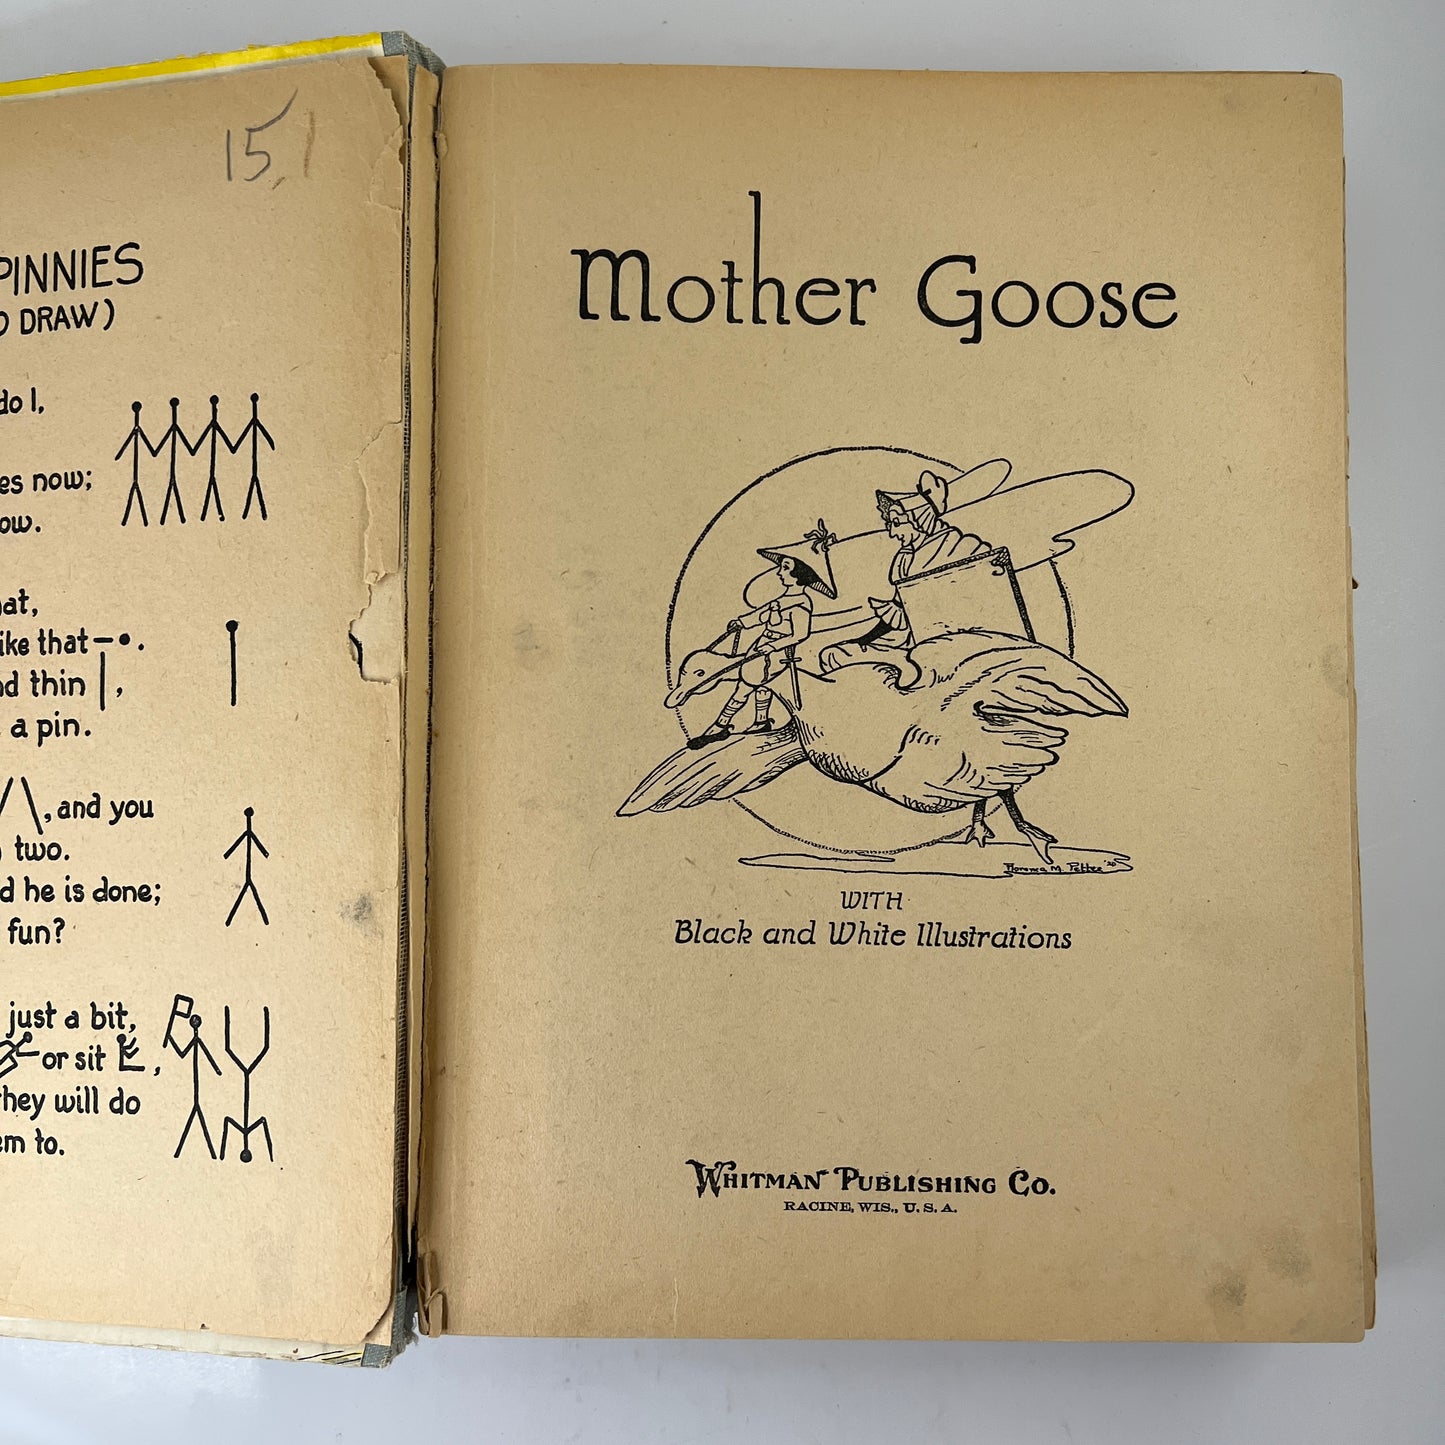 The Children's Big Book of Mother Goose